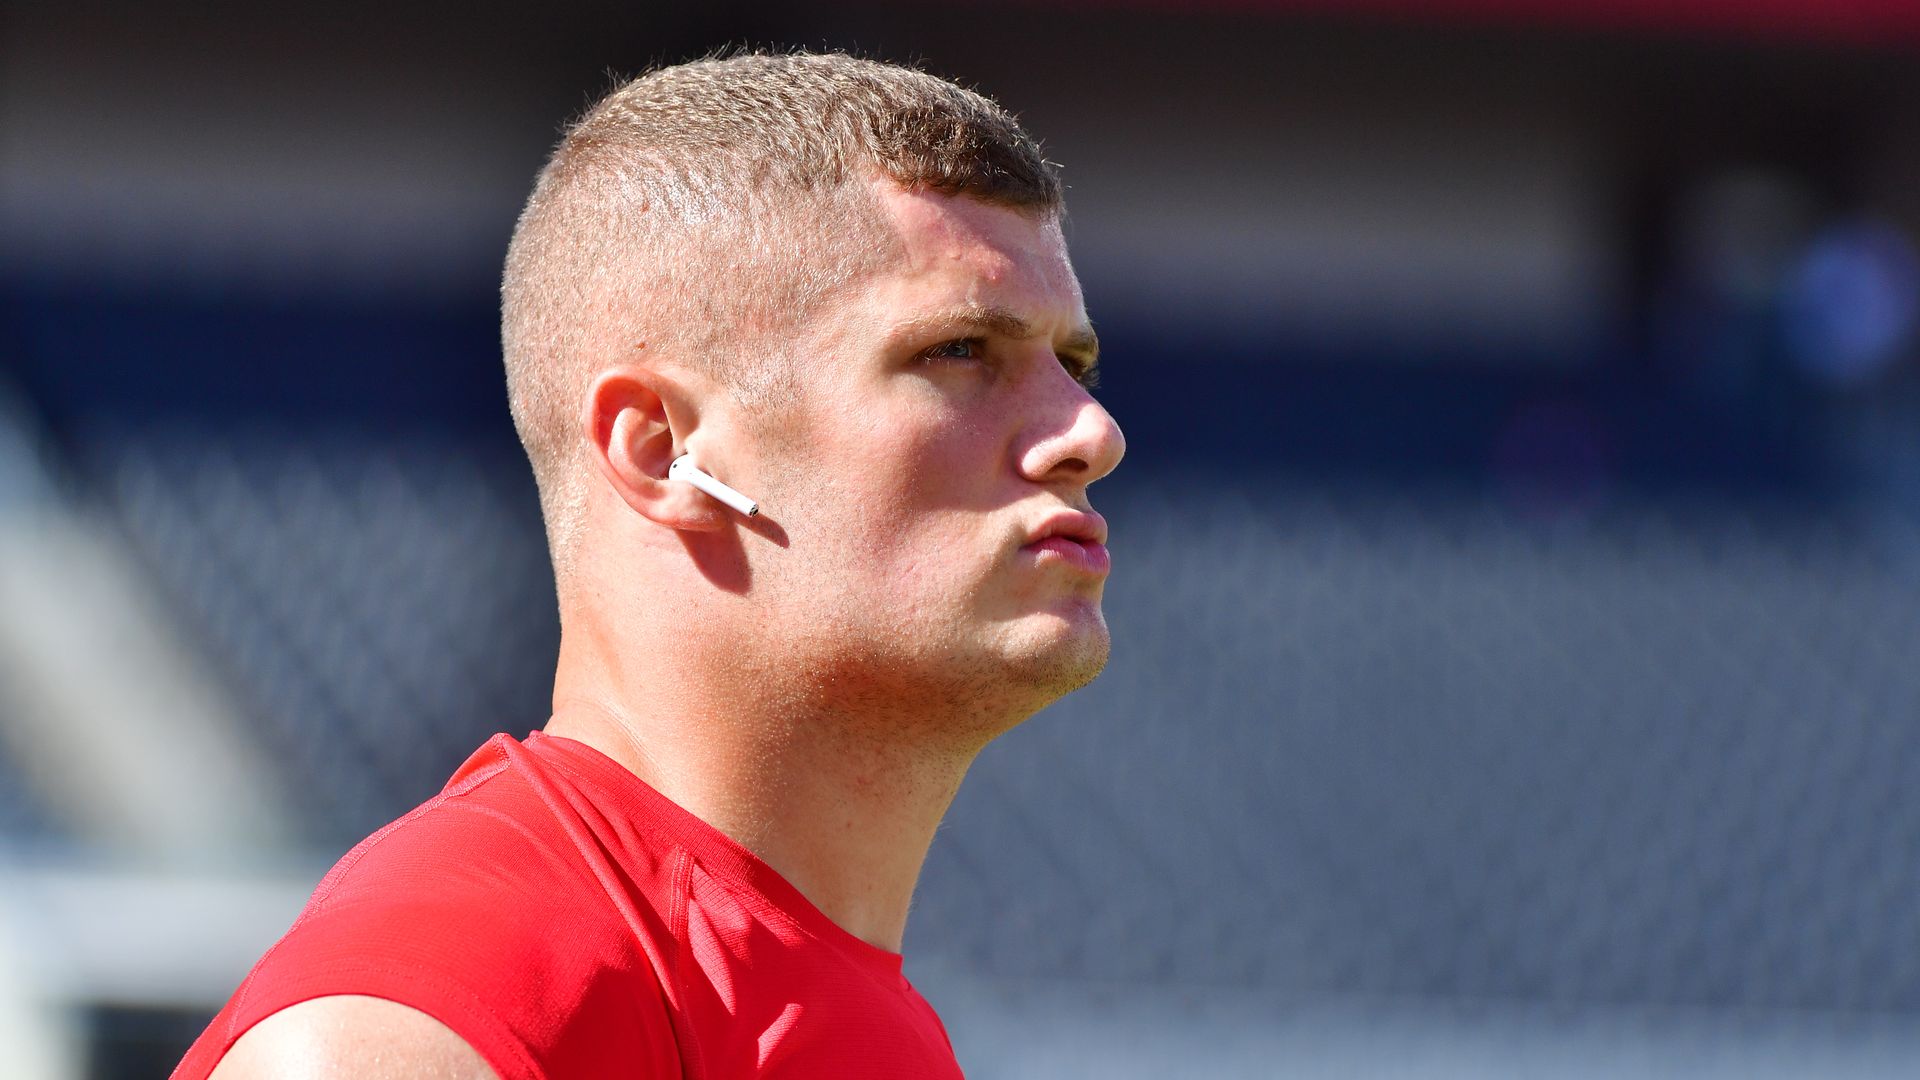 Photo of Carl Nassib in a red shirt looking into the air